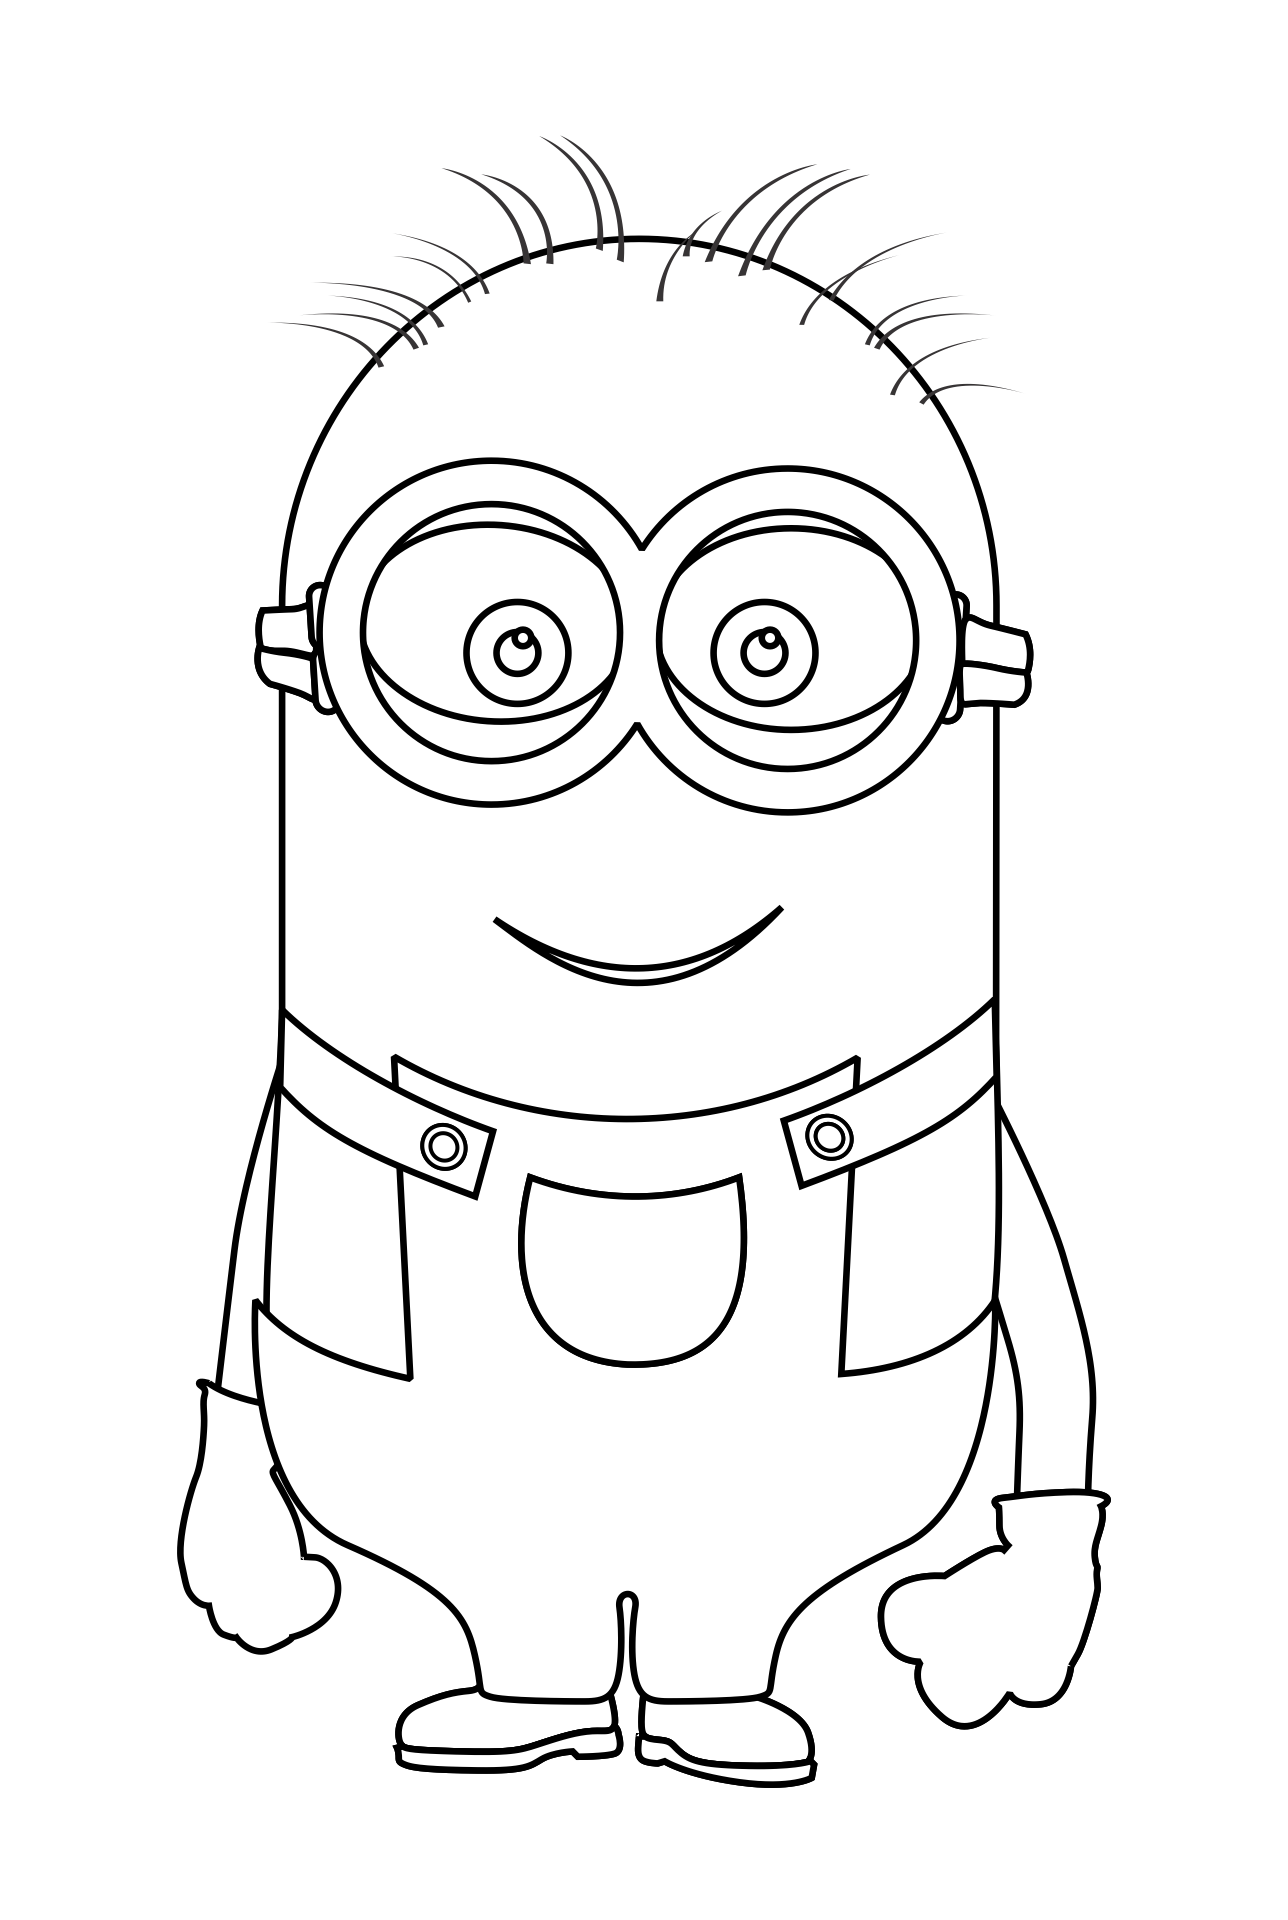 10 Best Easter Printable Coloring Pages Minions PDF for Free at Printablee